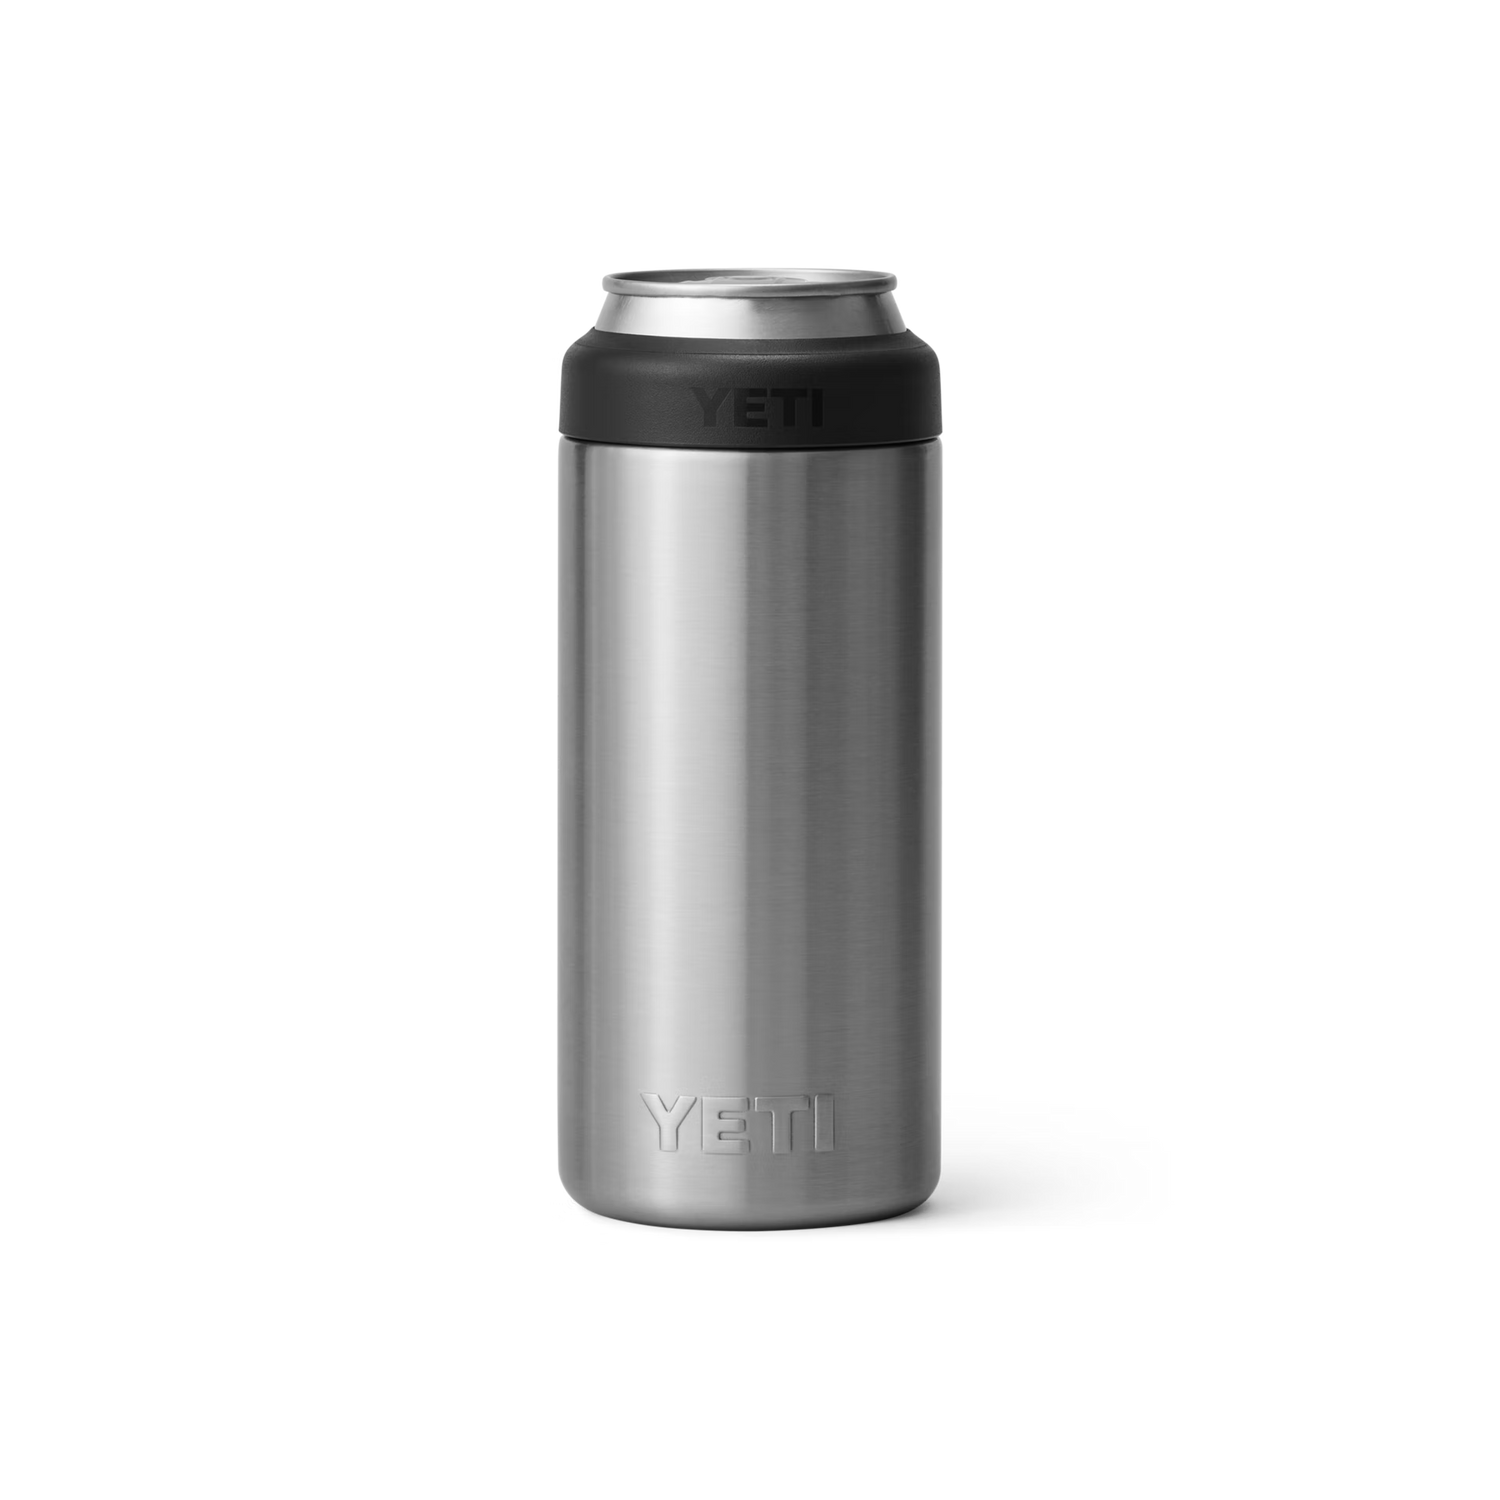 Promotional Thermos Double Wall Stainless Steel Can Insulators (12 Oz.)